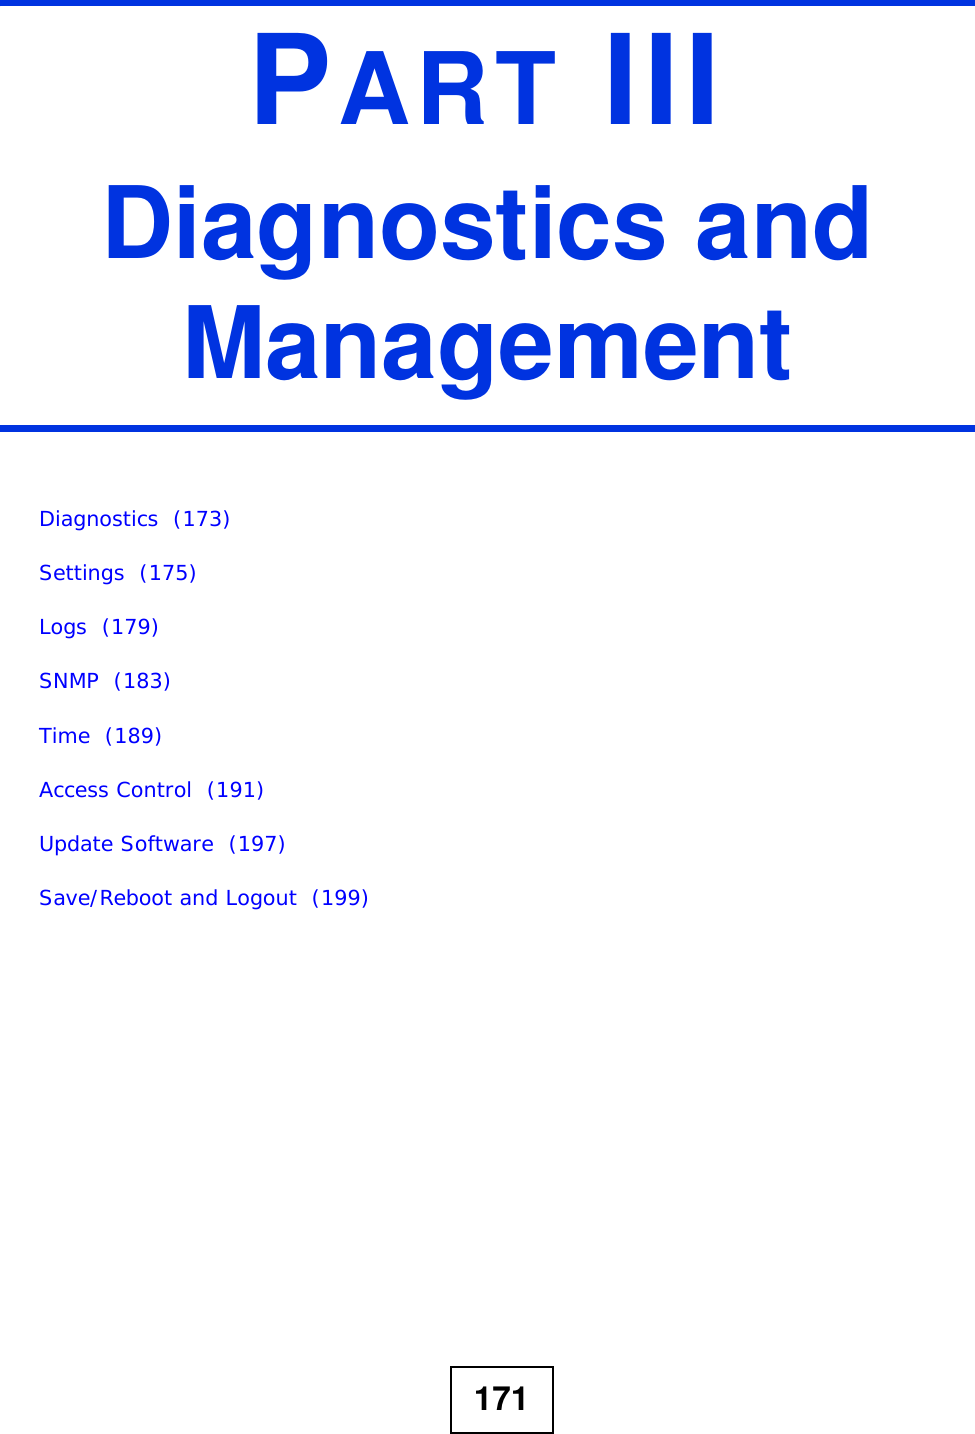 171PART IIIDiagnostics and ManagementDiagnostics  (173)Settings  (175)Logs  (179)SNMP  (183)Time  (189)Access Control  (191)Update Software  (197)Save/Reboot and Logout  (199)